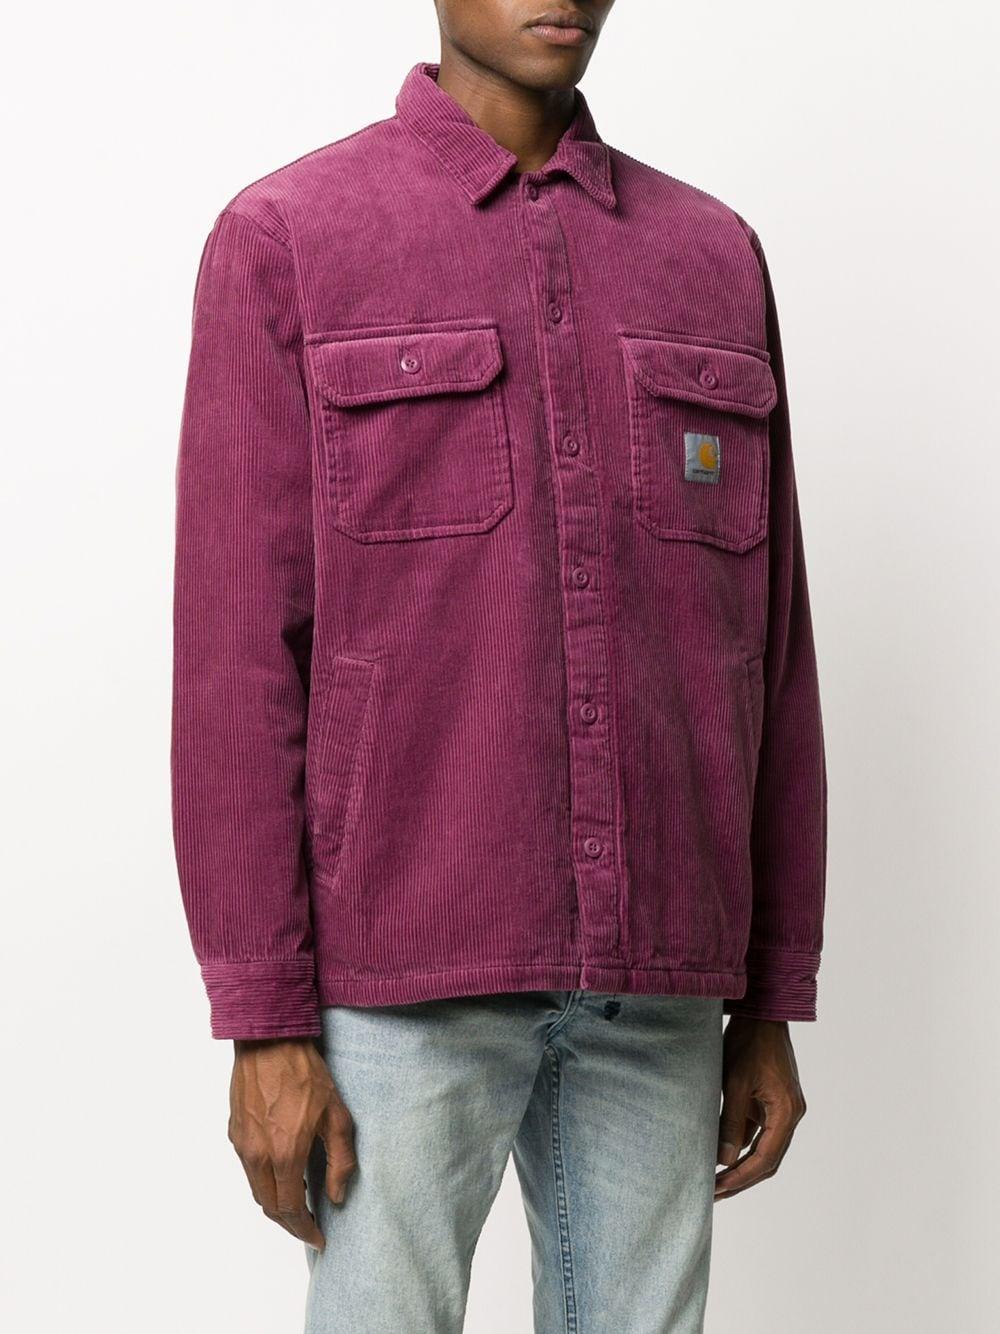 Carhartt WIP Whitsome Corduroy Shirt Jacket in Purple for Men | Lyst